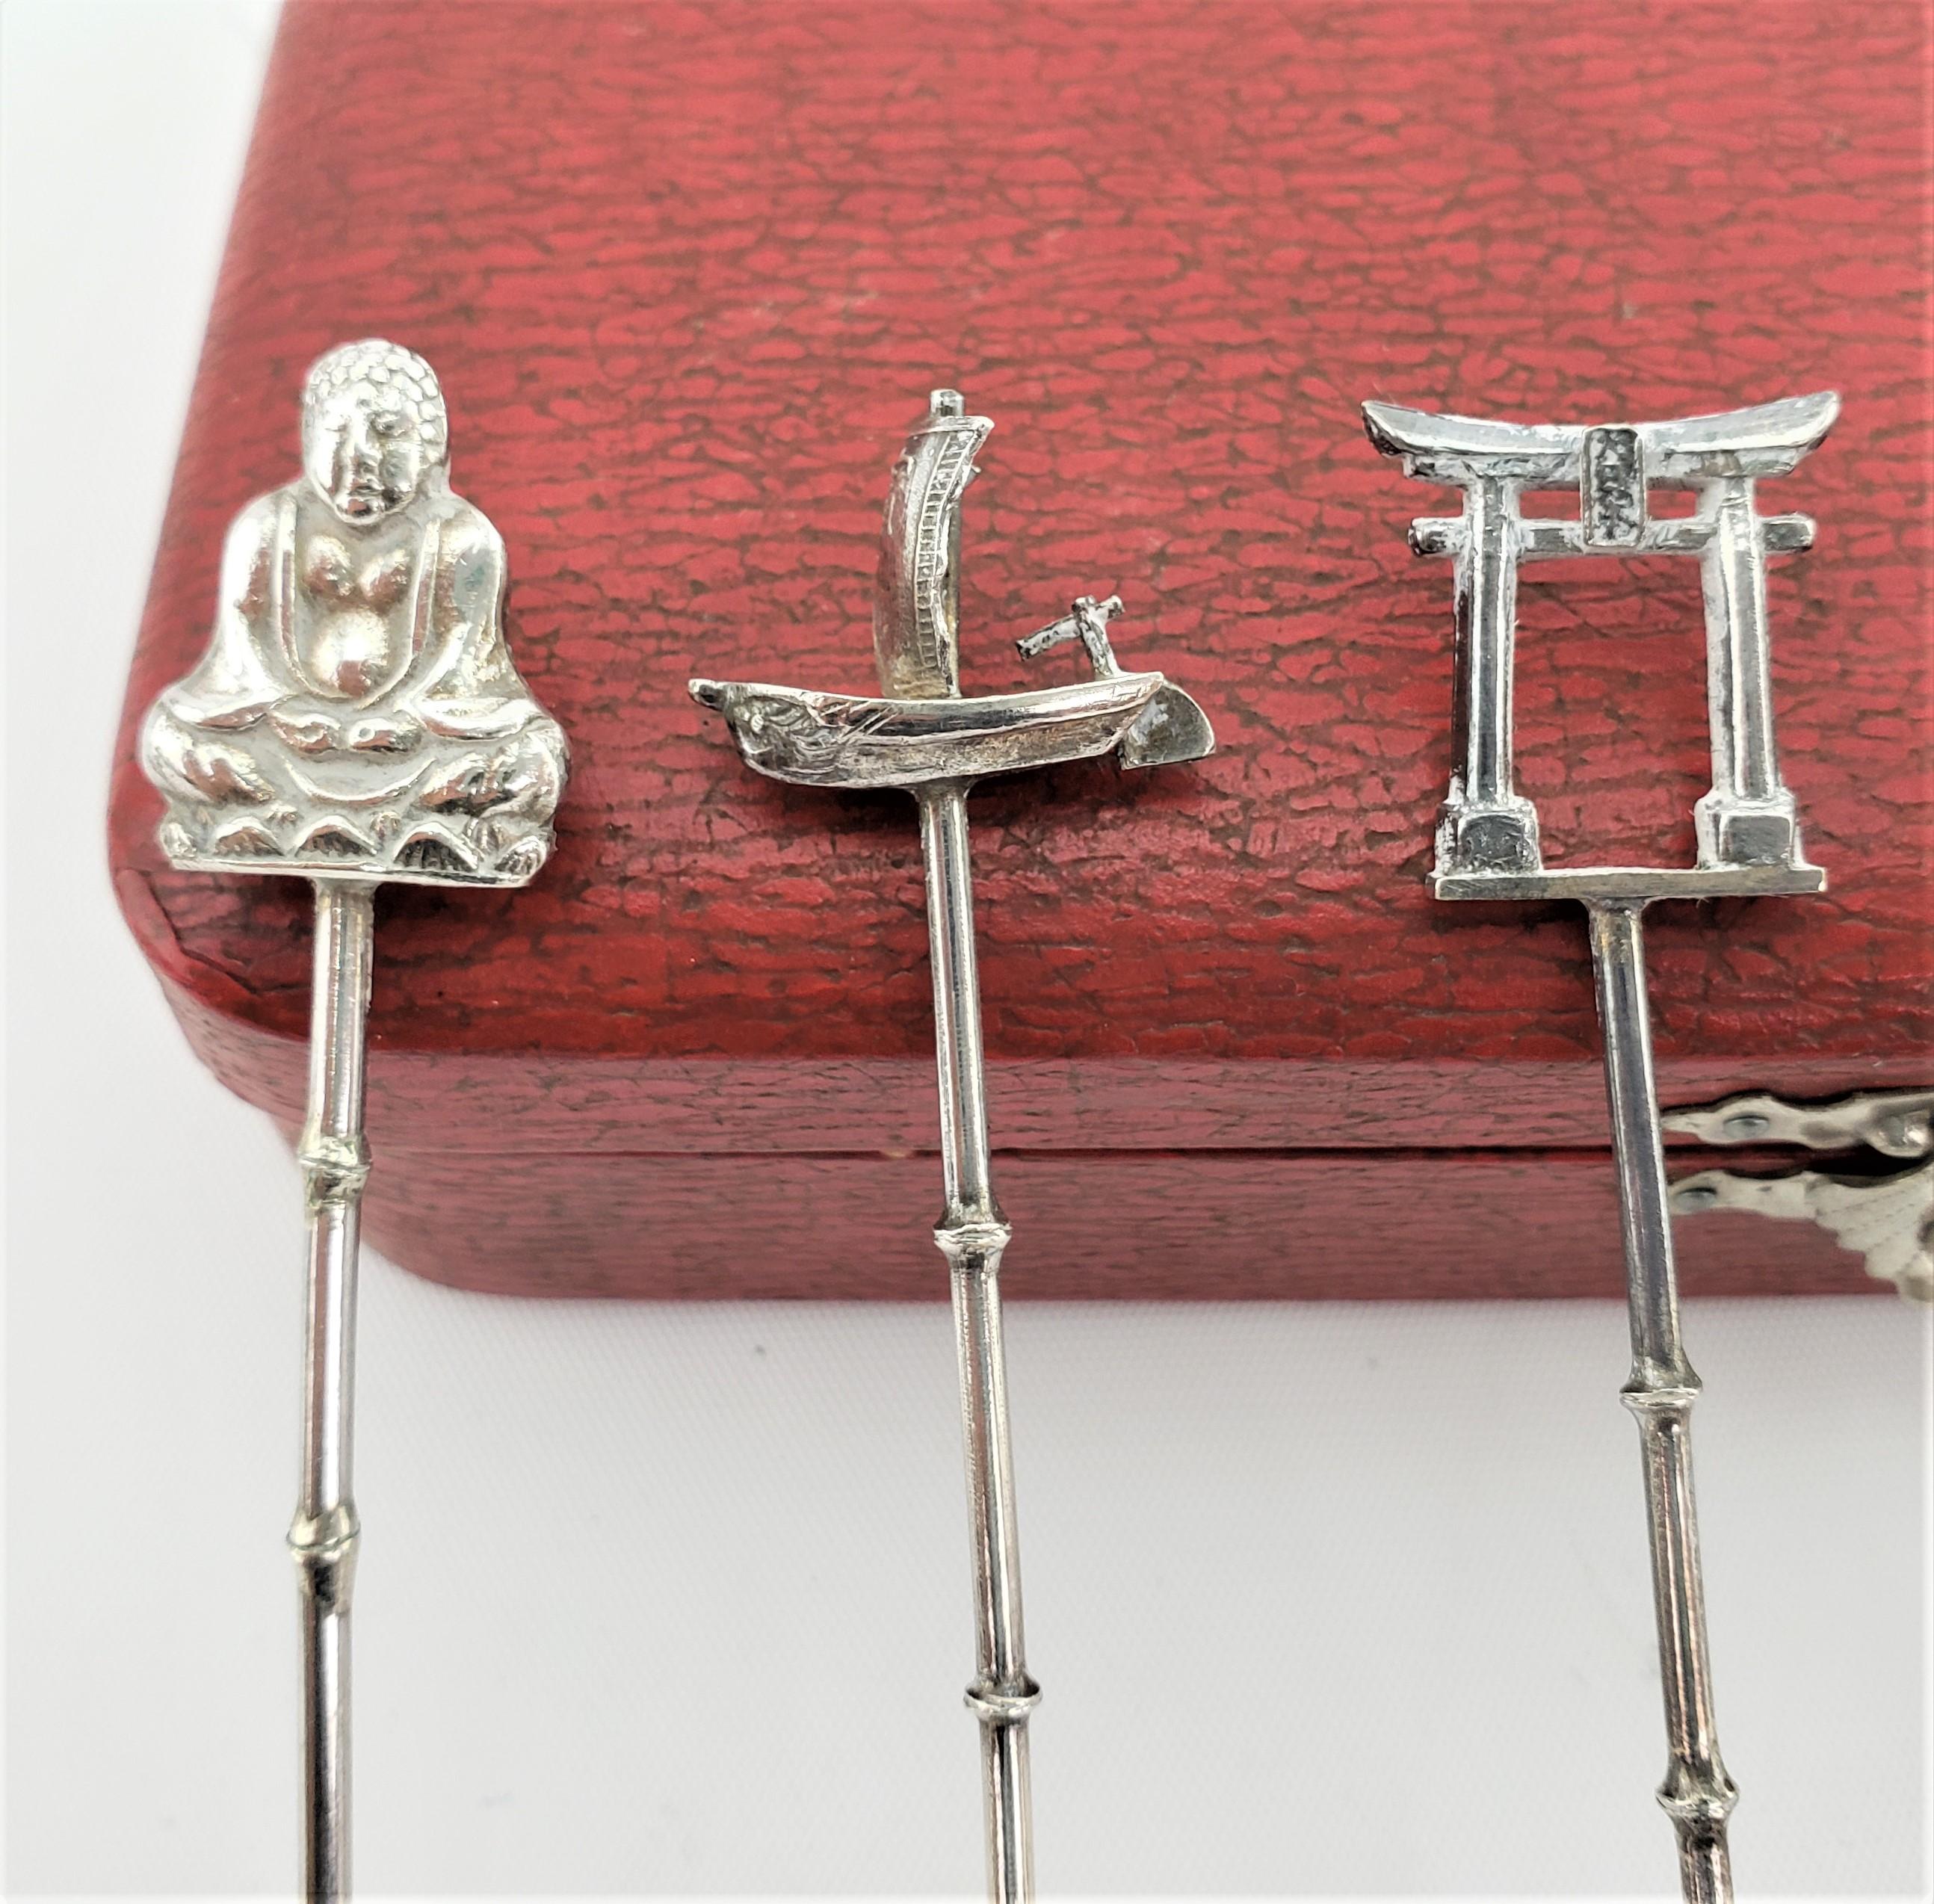 This boxed set of six figural silver souvenir of the Imperial Hotel coffee or espresso spoons were made by the Okubo Brothers of Japan in approximately 1950 in an Anglo-Japanese style. The top of each spoon is done with a figural symbol of the